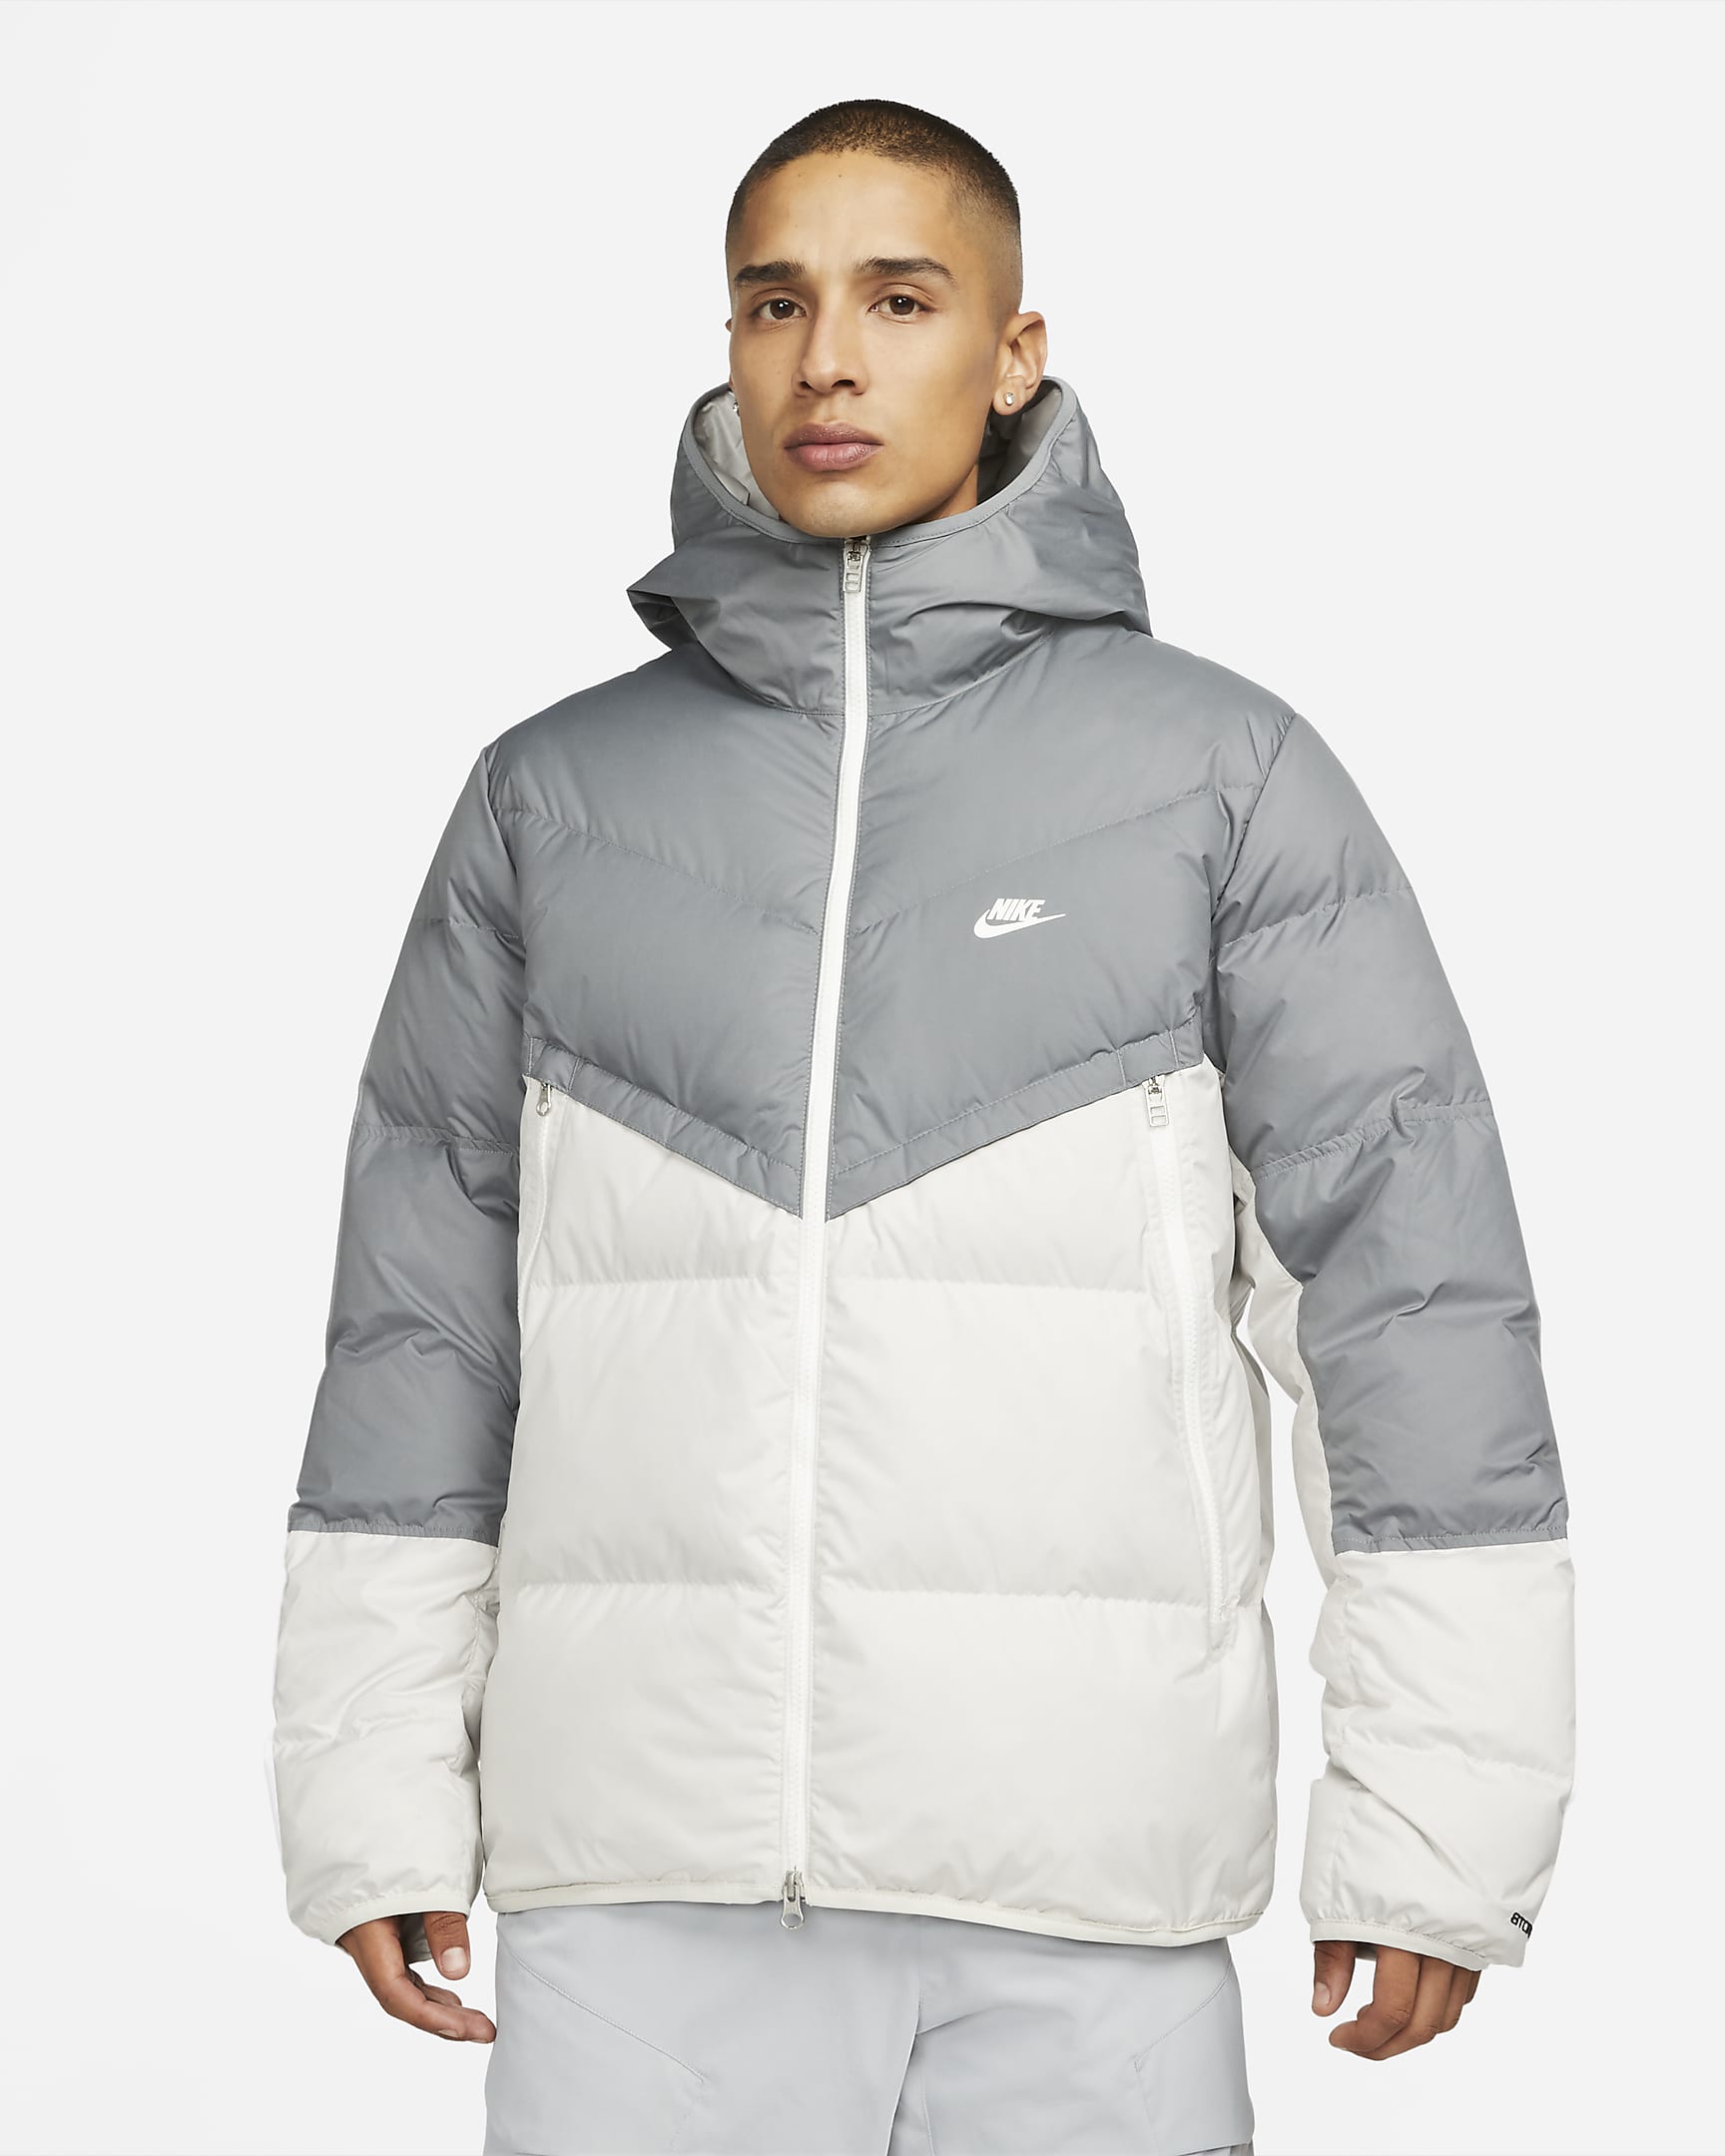 nike-sportswear-storm-fit-windrunner-mens-hooded-jacket-1XlGm6.png